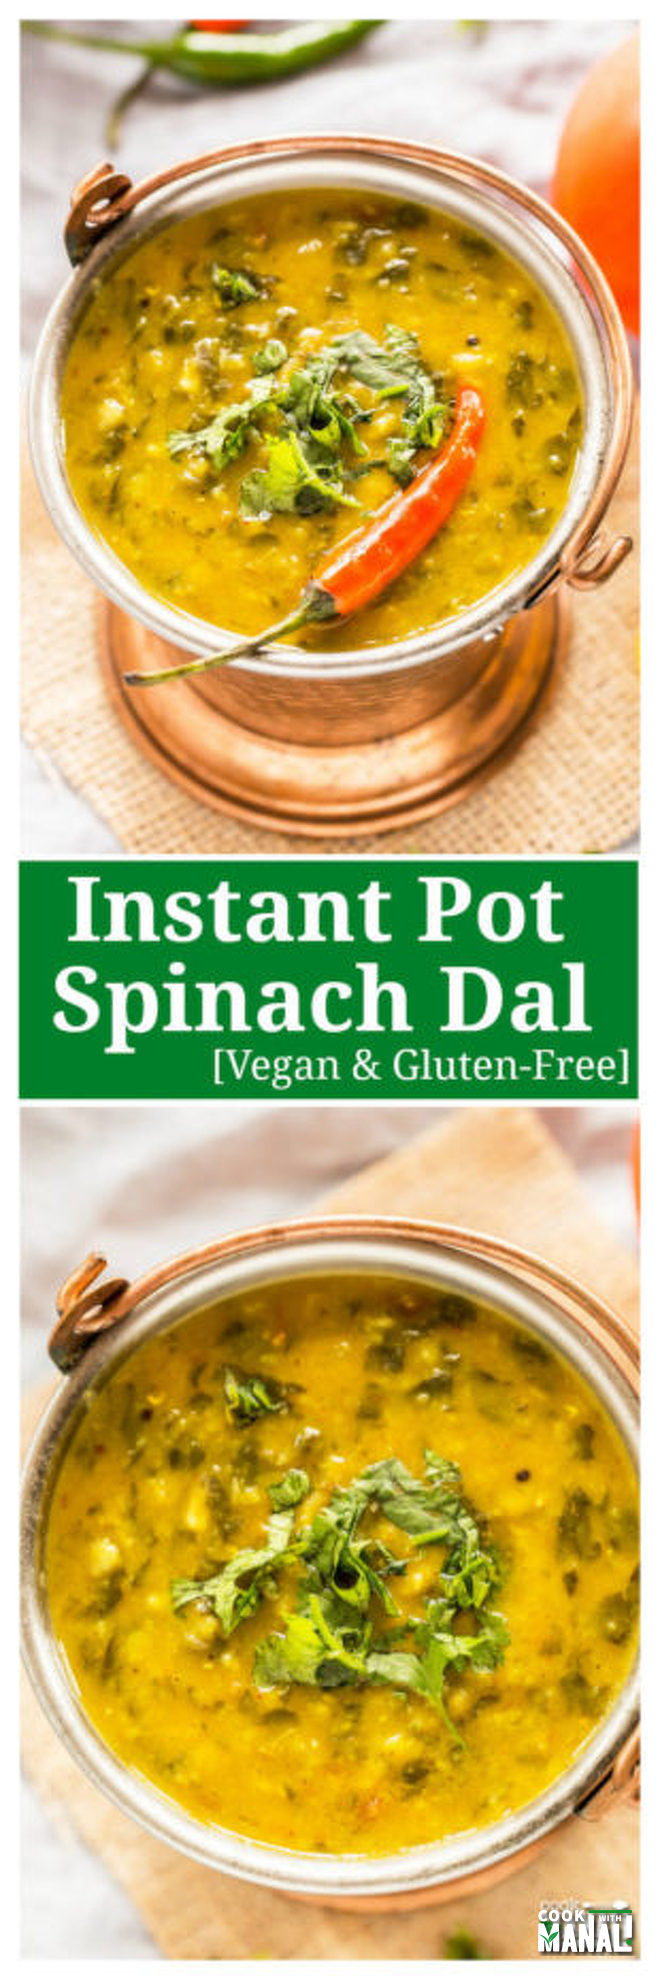 Instant Pot Spinach Dal + Video - Cook With Manali